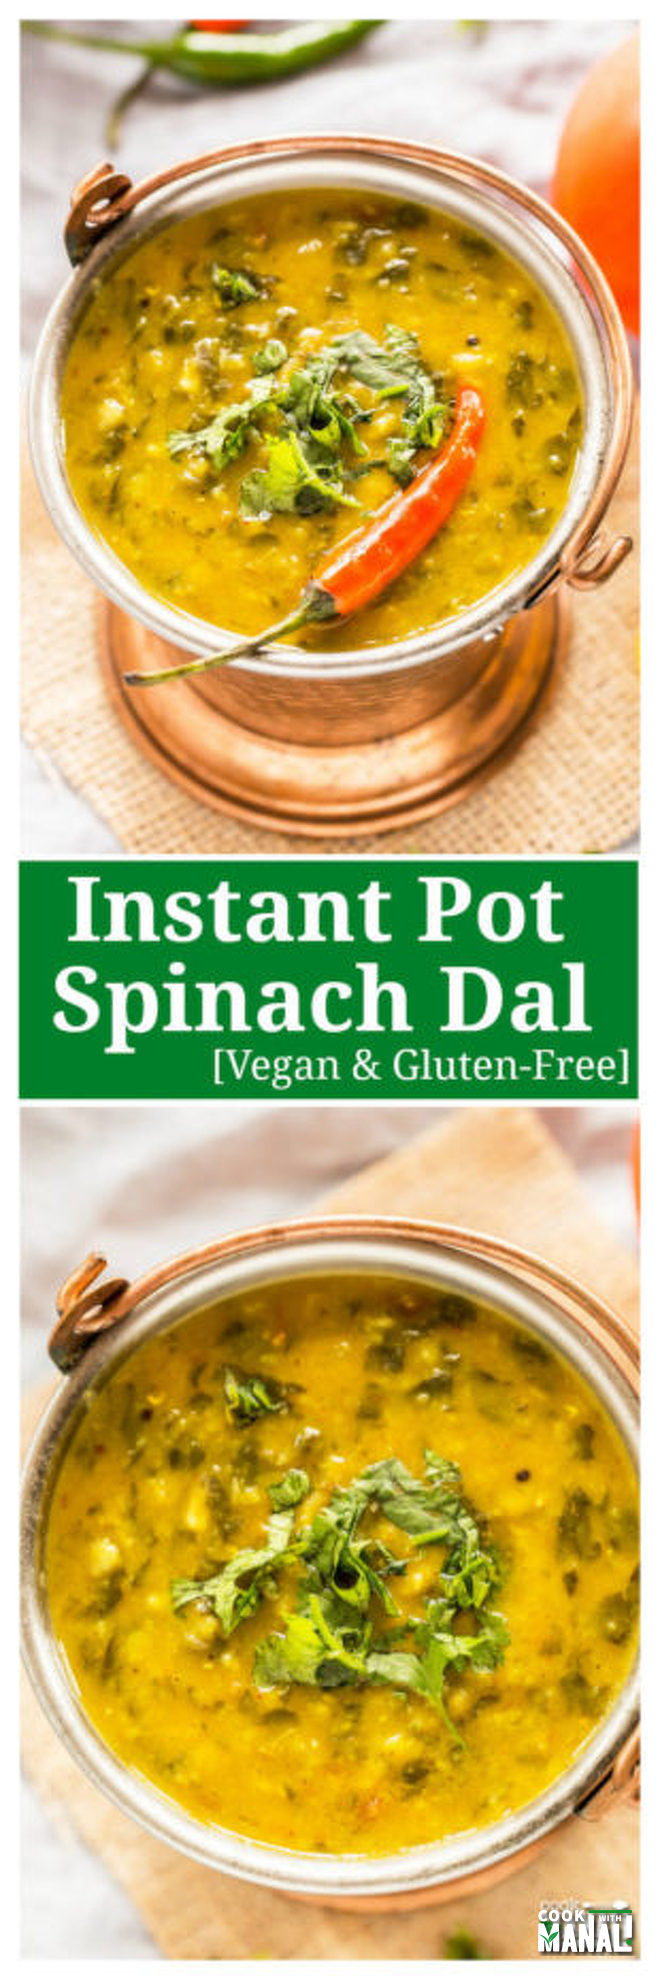 Instant Pot Spinach Dal + Video - Cook With Manali